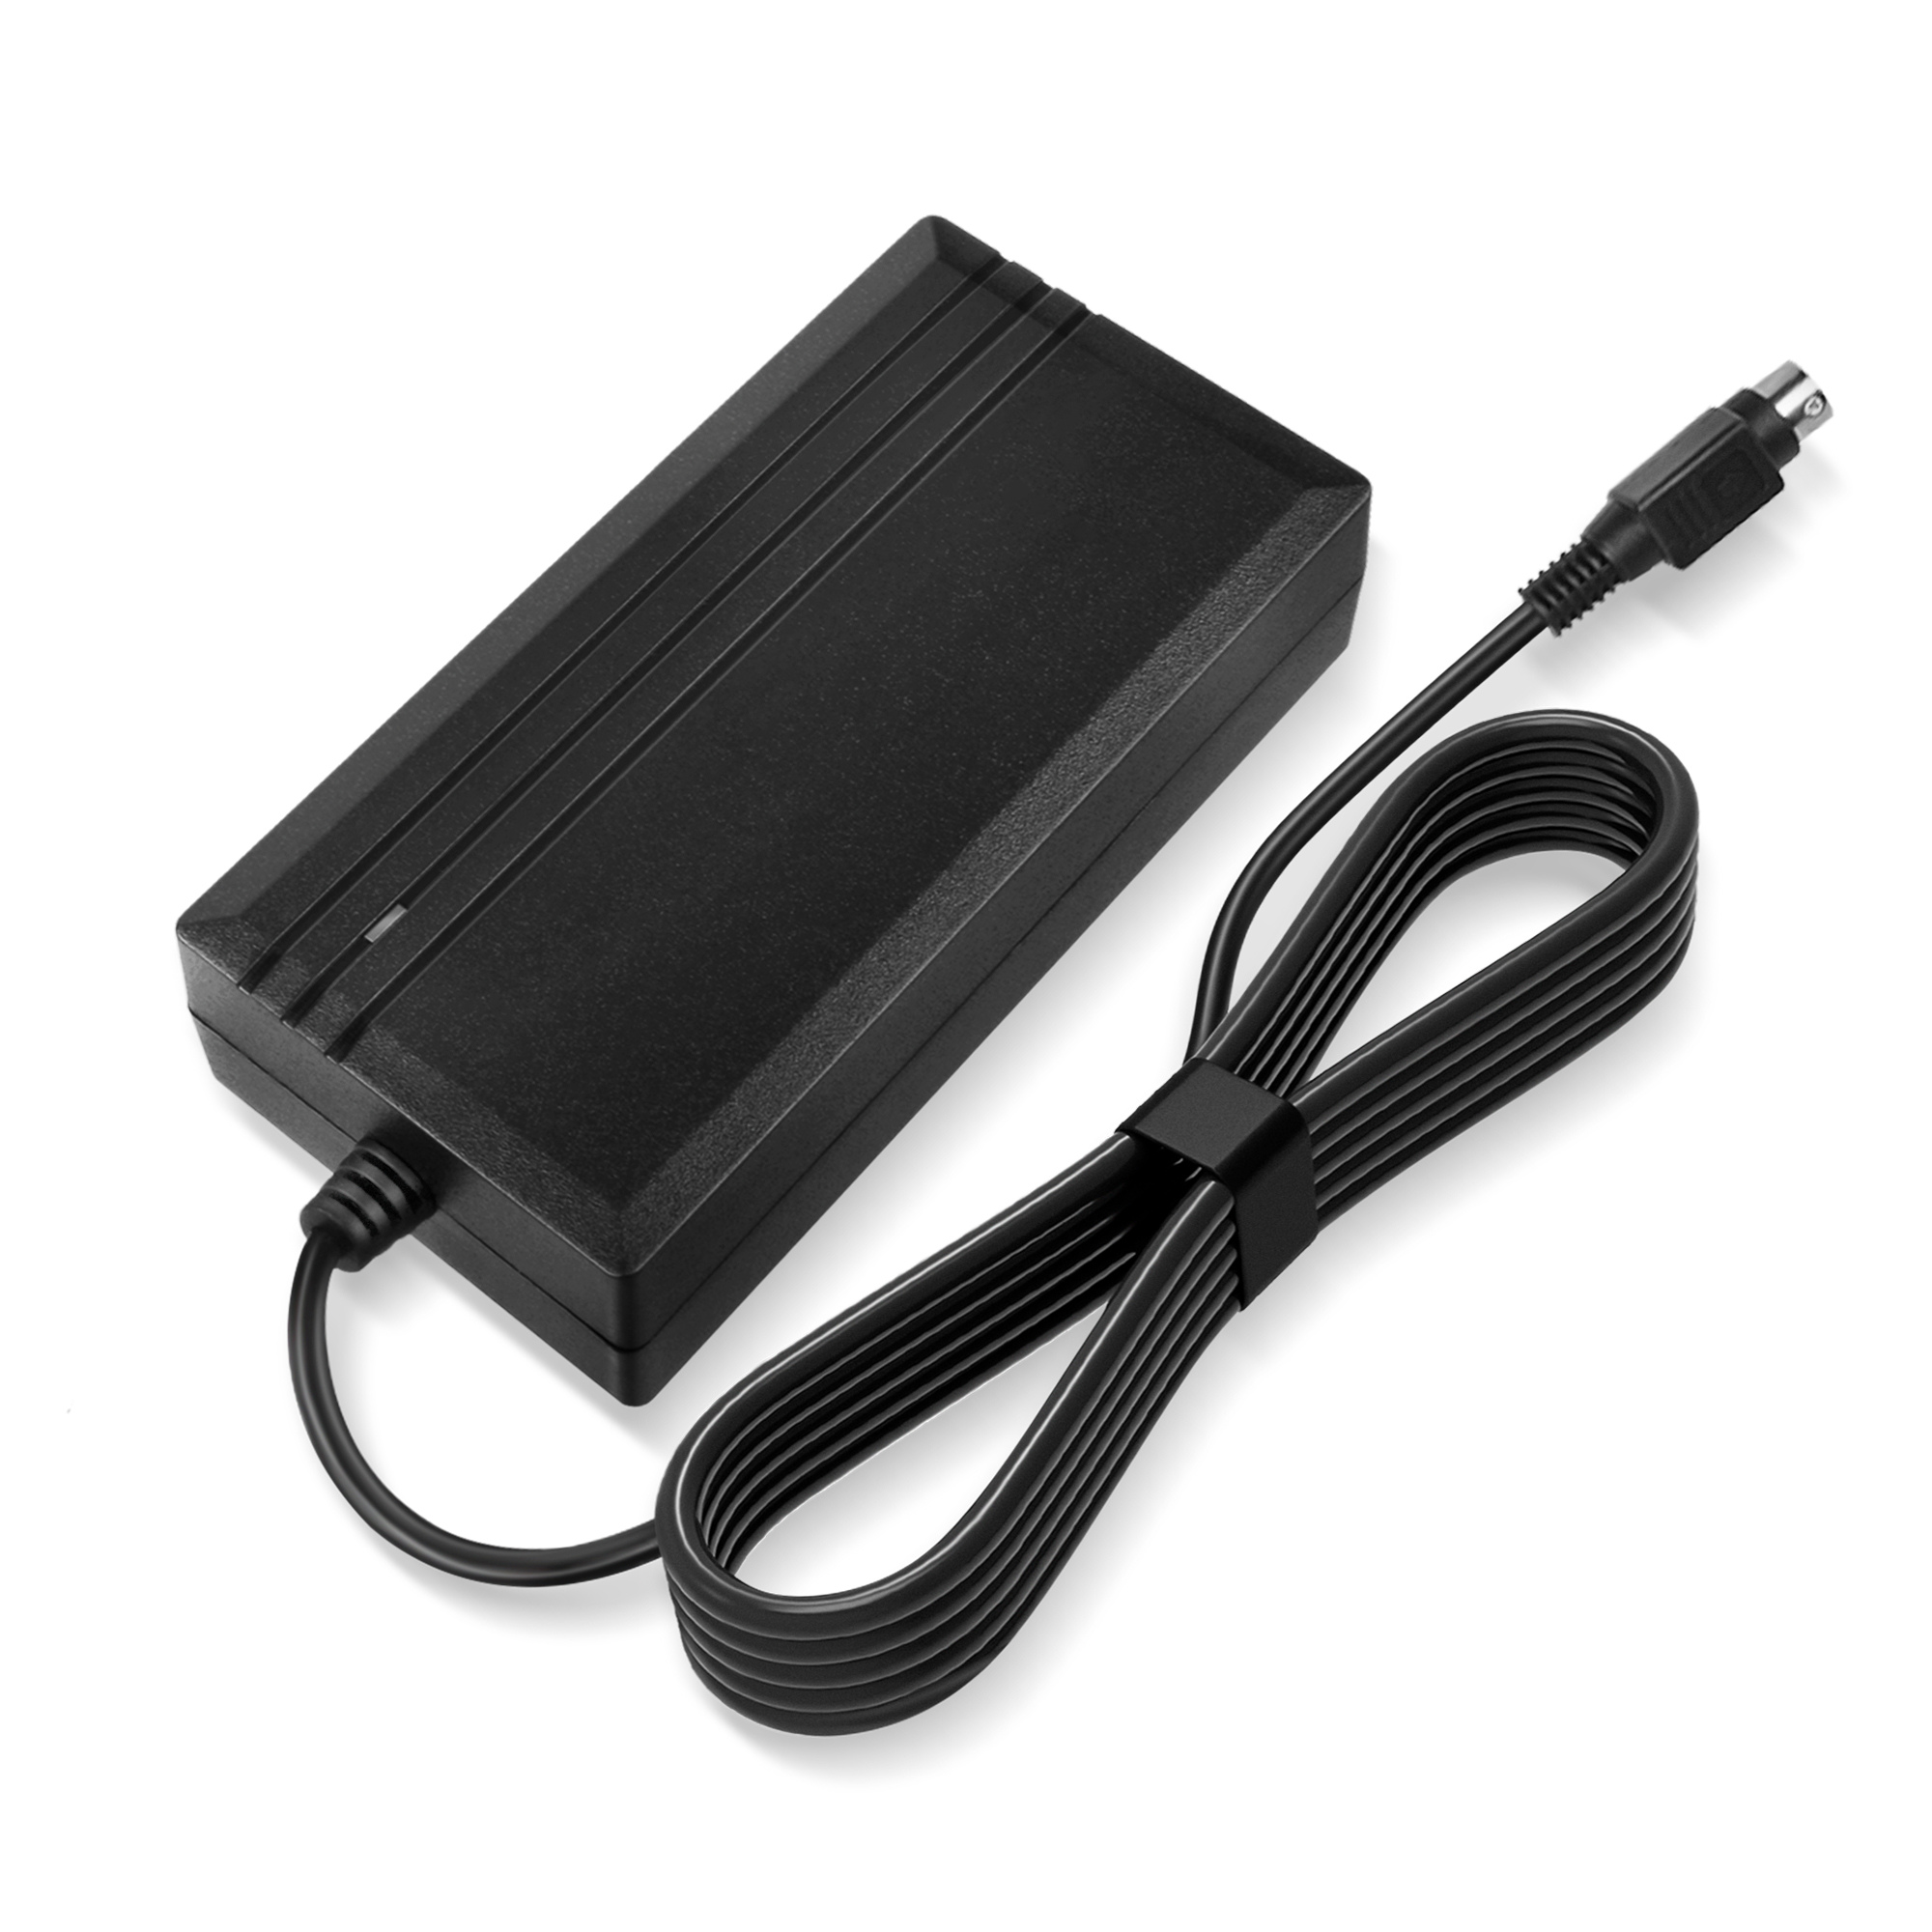 PKPOWER 4-Pin AC DC Adapter For StarTech SATDOCK4U3E SATDOCK4U3RE SDOCK4U33 S3540BU33E SAT35401U 4 Bay eSATA USB 3.0 to SATA HD Docking Station Hard Disk Drive Enclosure HDD Star Tech Power Supply - image 1 of 5